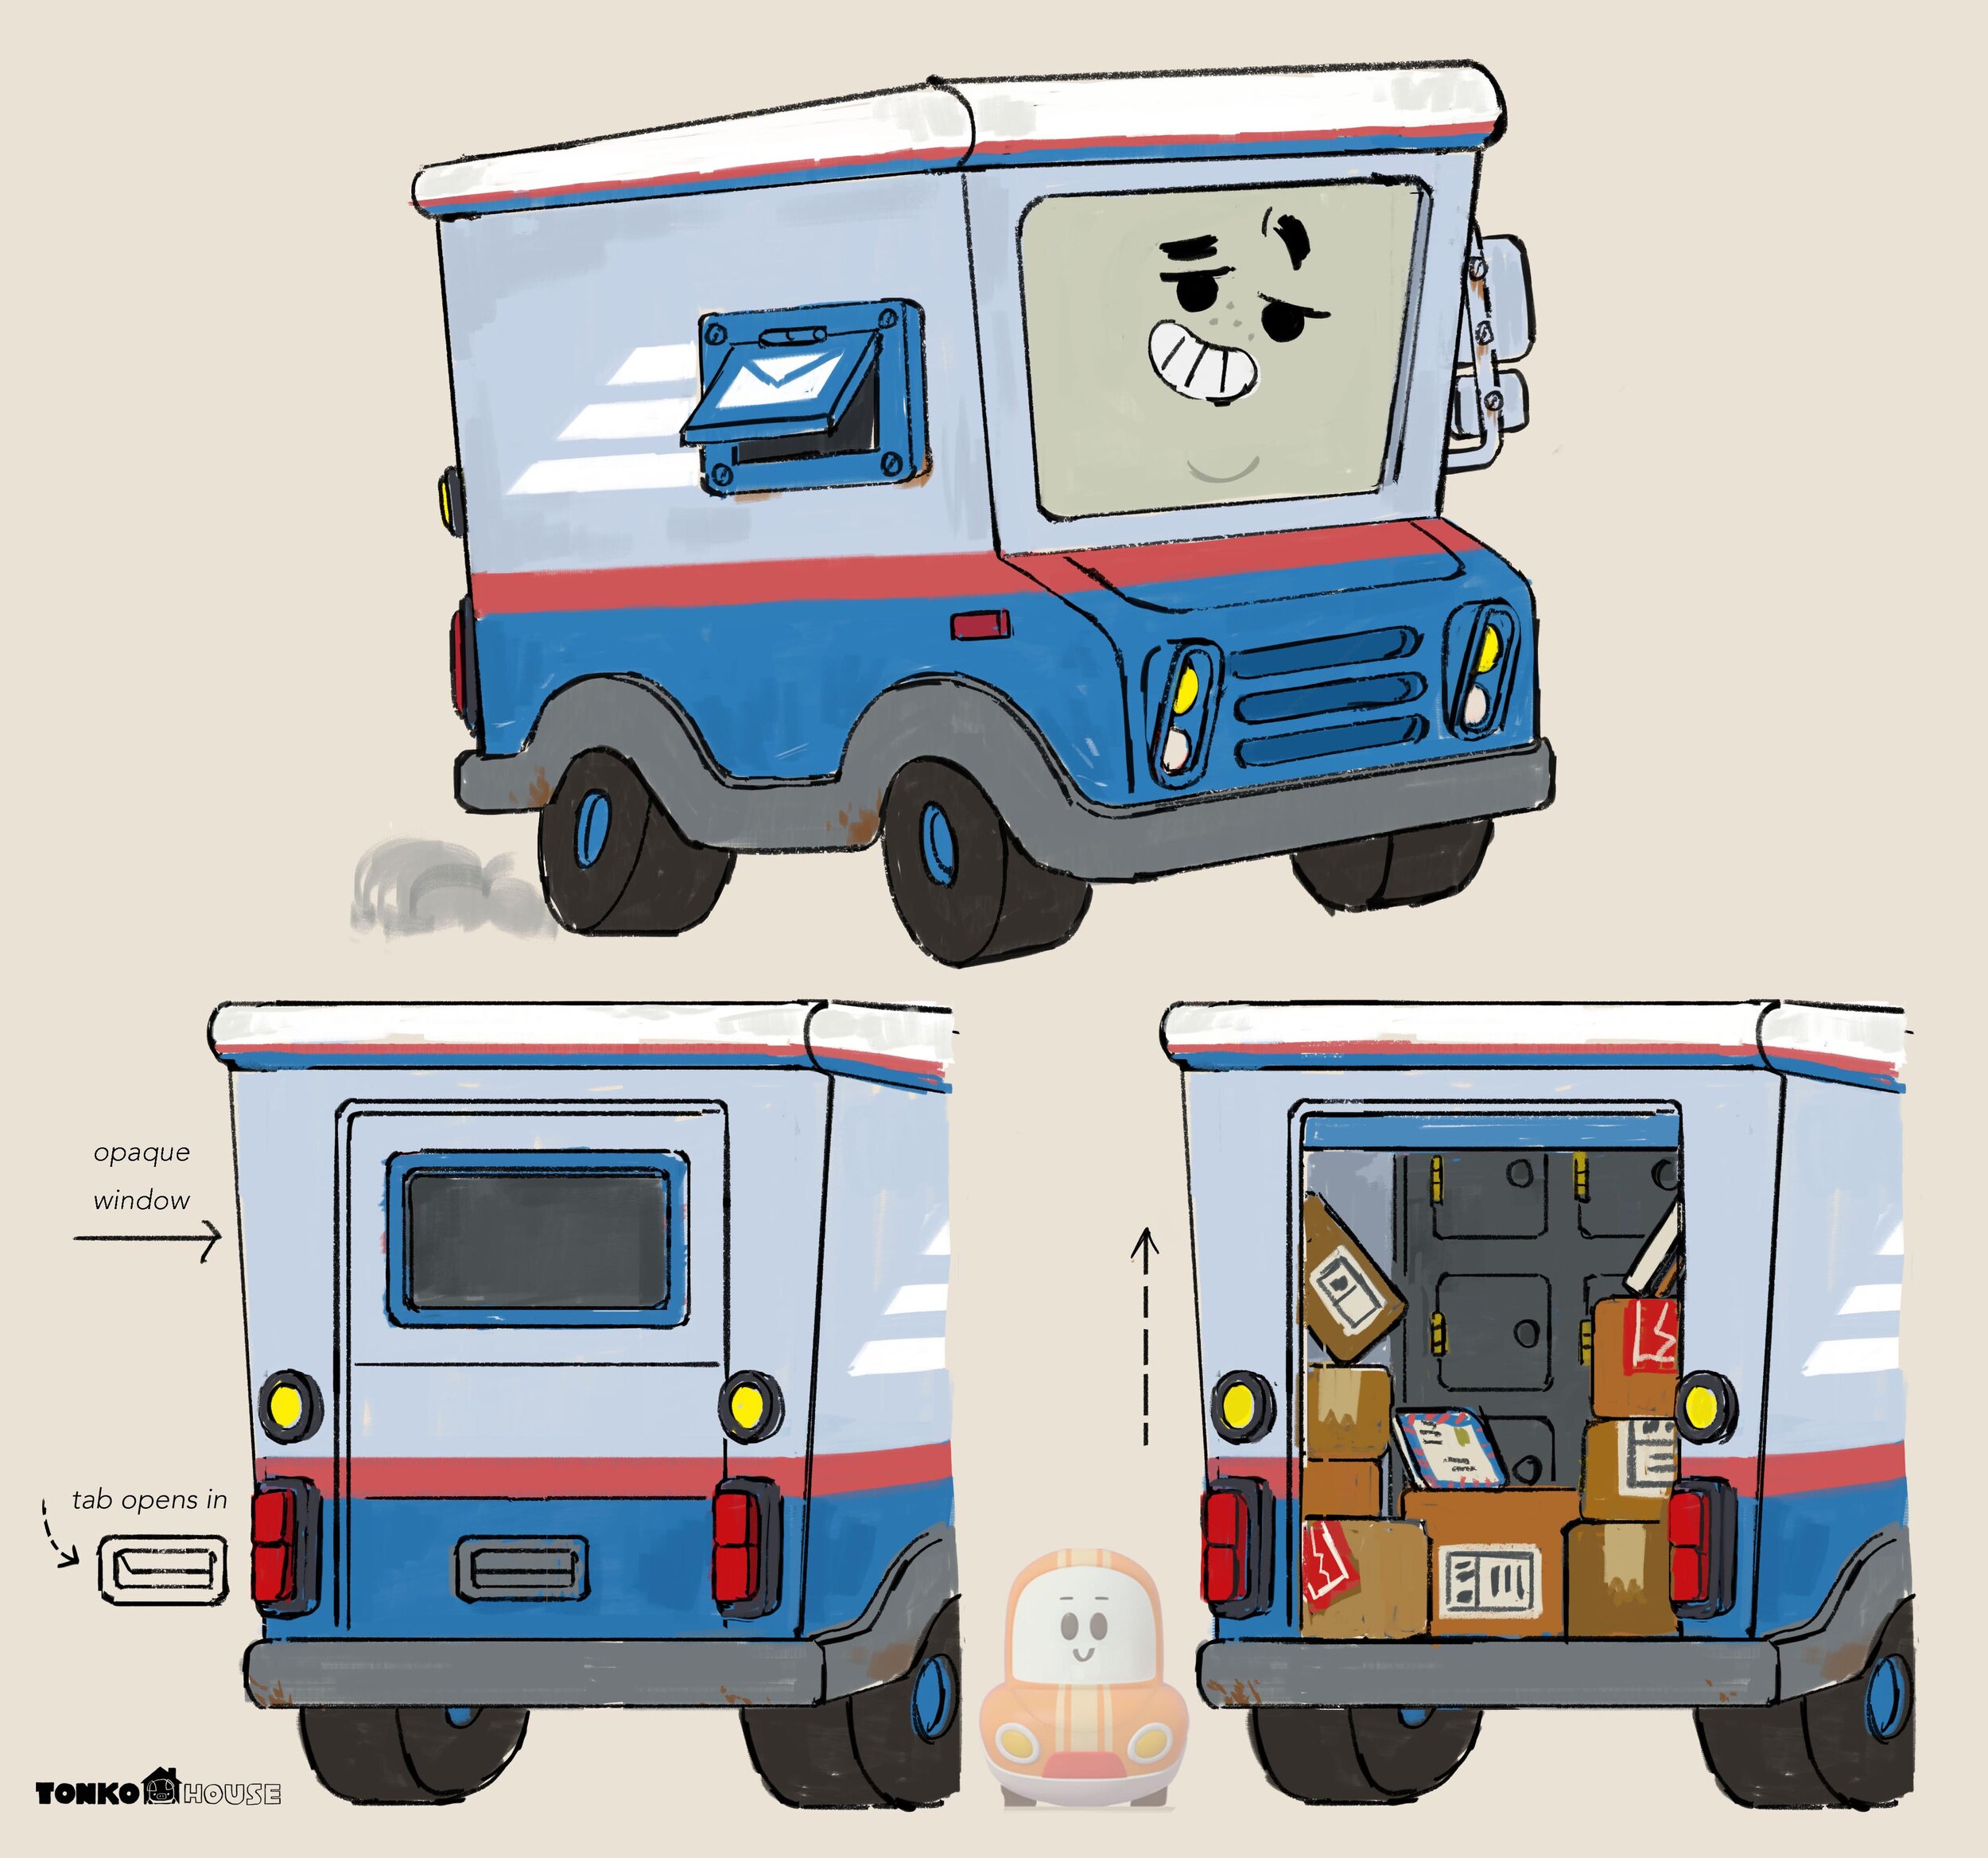 Mary the Mail Truck